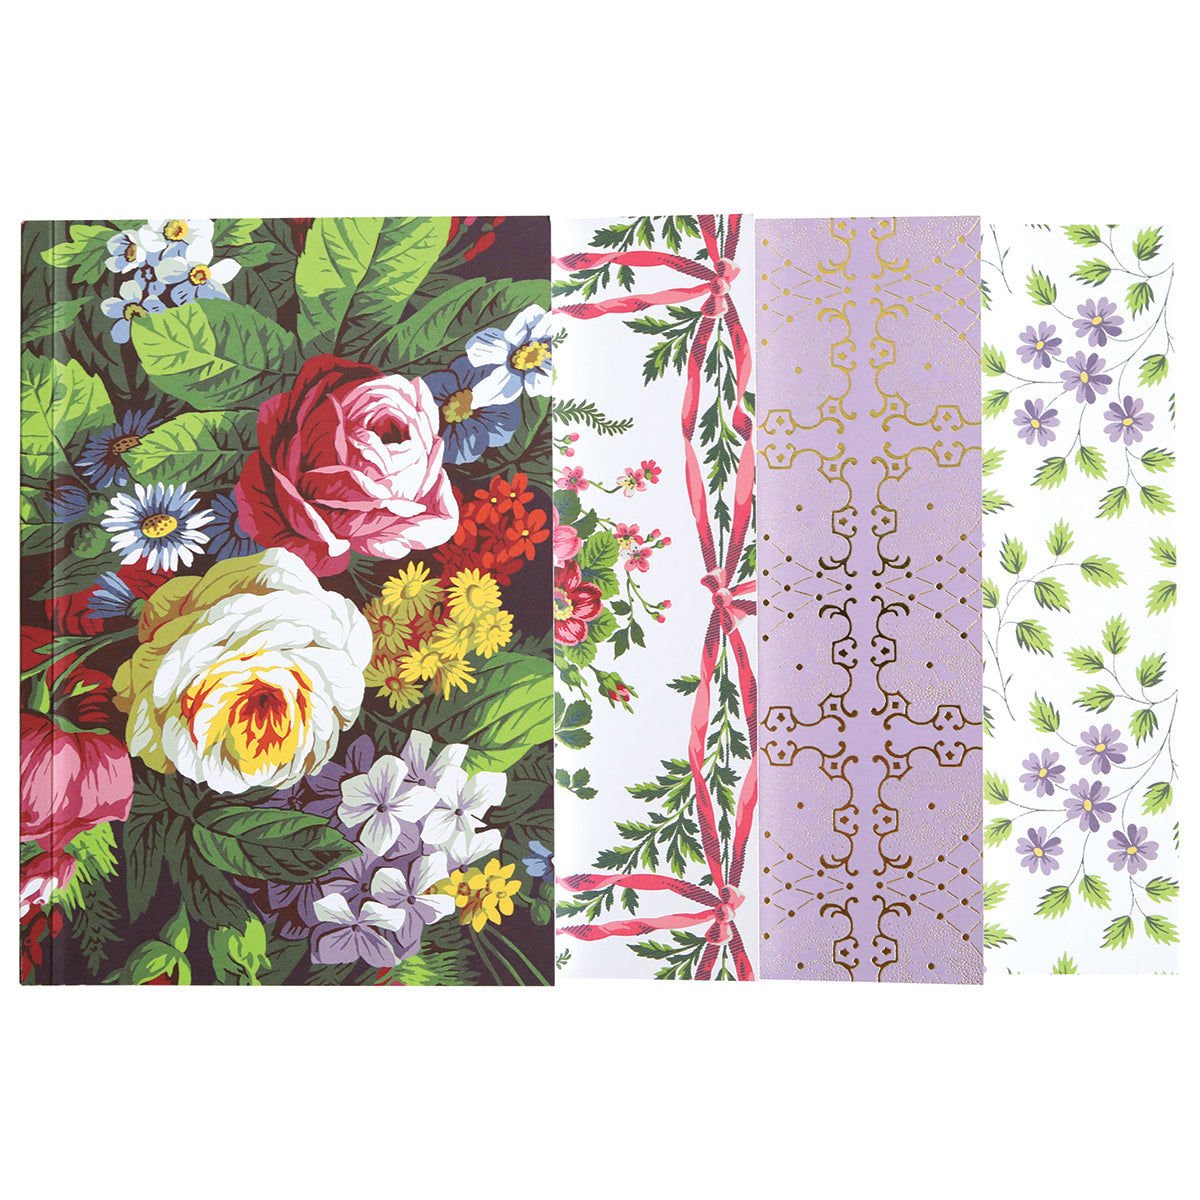 A collage of various floral patterns divided into panels with detailed botanical illustrations, ornamental borders, and purple background with flower motifs on Astrid Floral Notebook Set pages of 4.75" x 6.5".